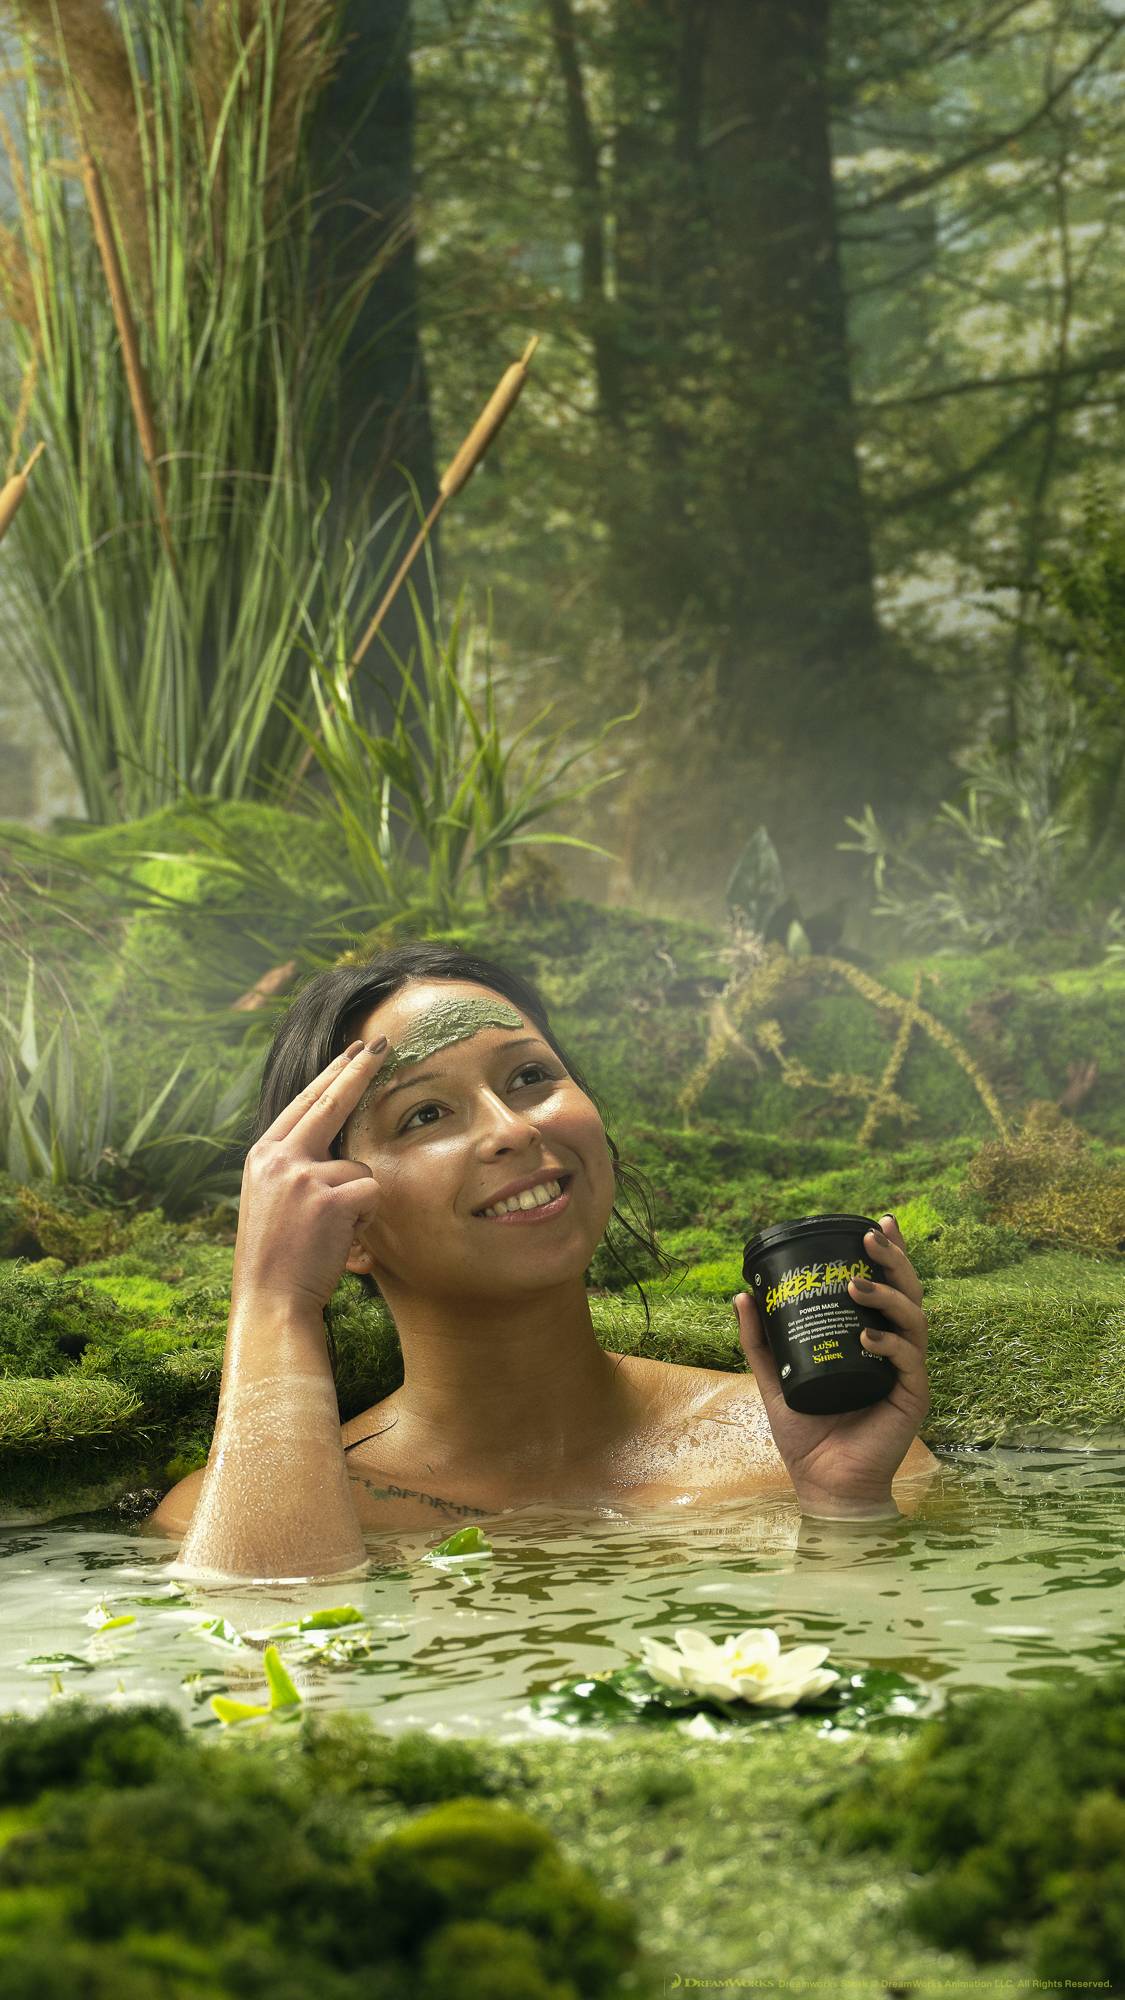 The model is sat in a mossy swamp environment in a spring deep enough to sit in. They are gently applying the Shrek Pack face mask with one hand while holding the product pot with the other. 